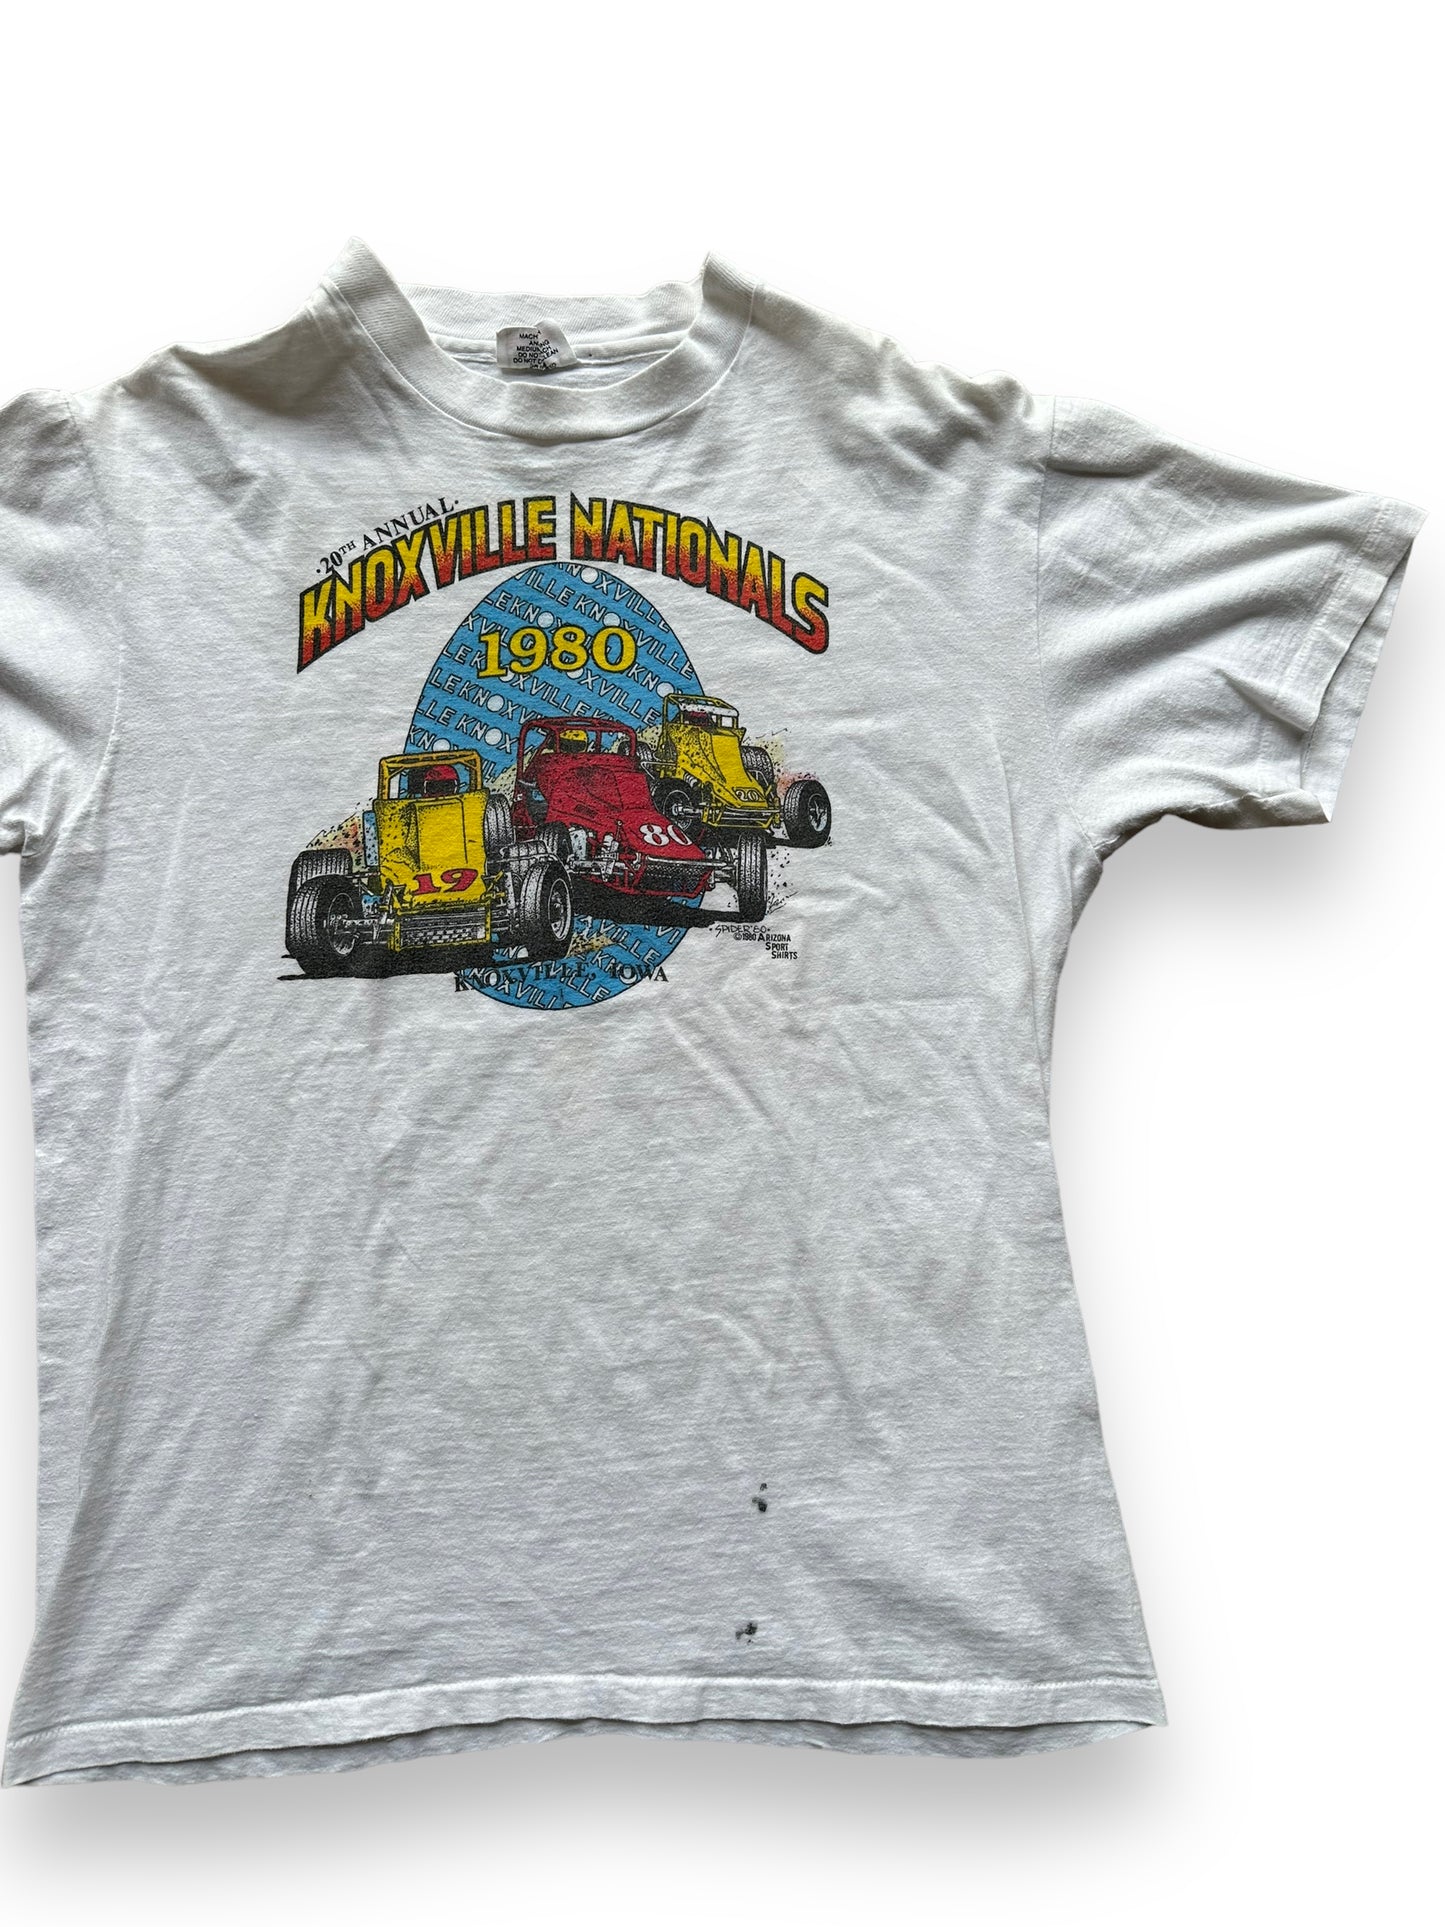 Front left of Vintage 1980 Knoxville Nationals Tee SZ L |  Vintage Auto Tee Seattle | Barn Owl Vintage